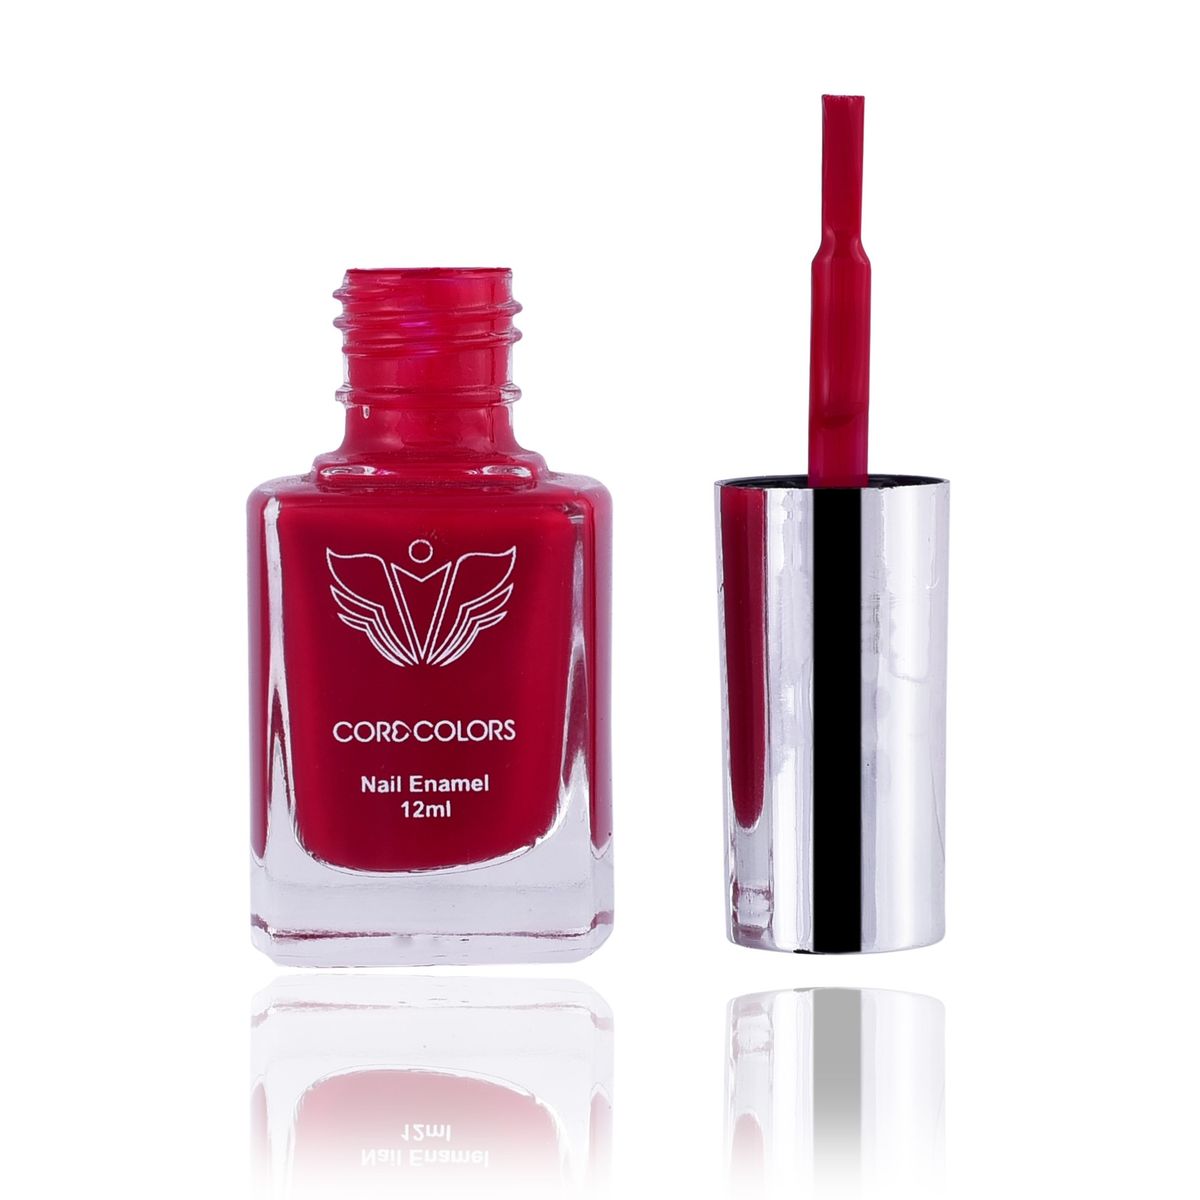 DeBelle Gel Nail Lacquer Moulin Rouge Maroon Nail Polish 8 ml Online in  India, Buy at Best Price from Firstcry.com - 12696298